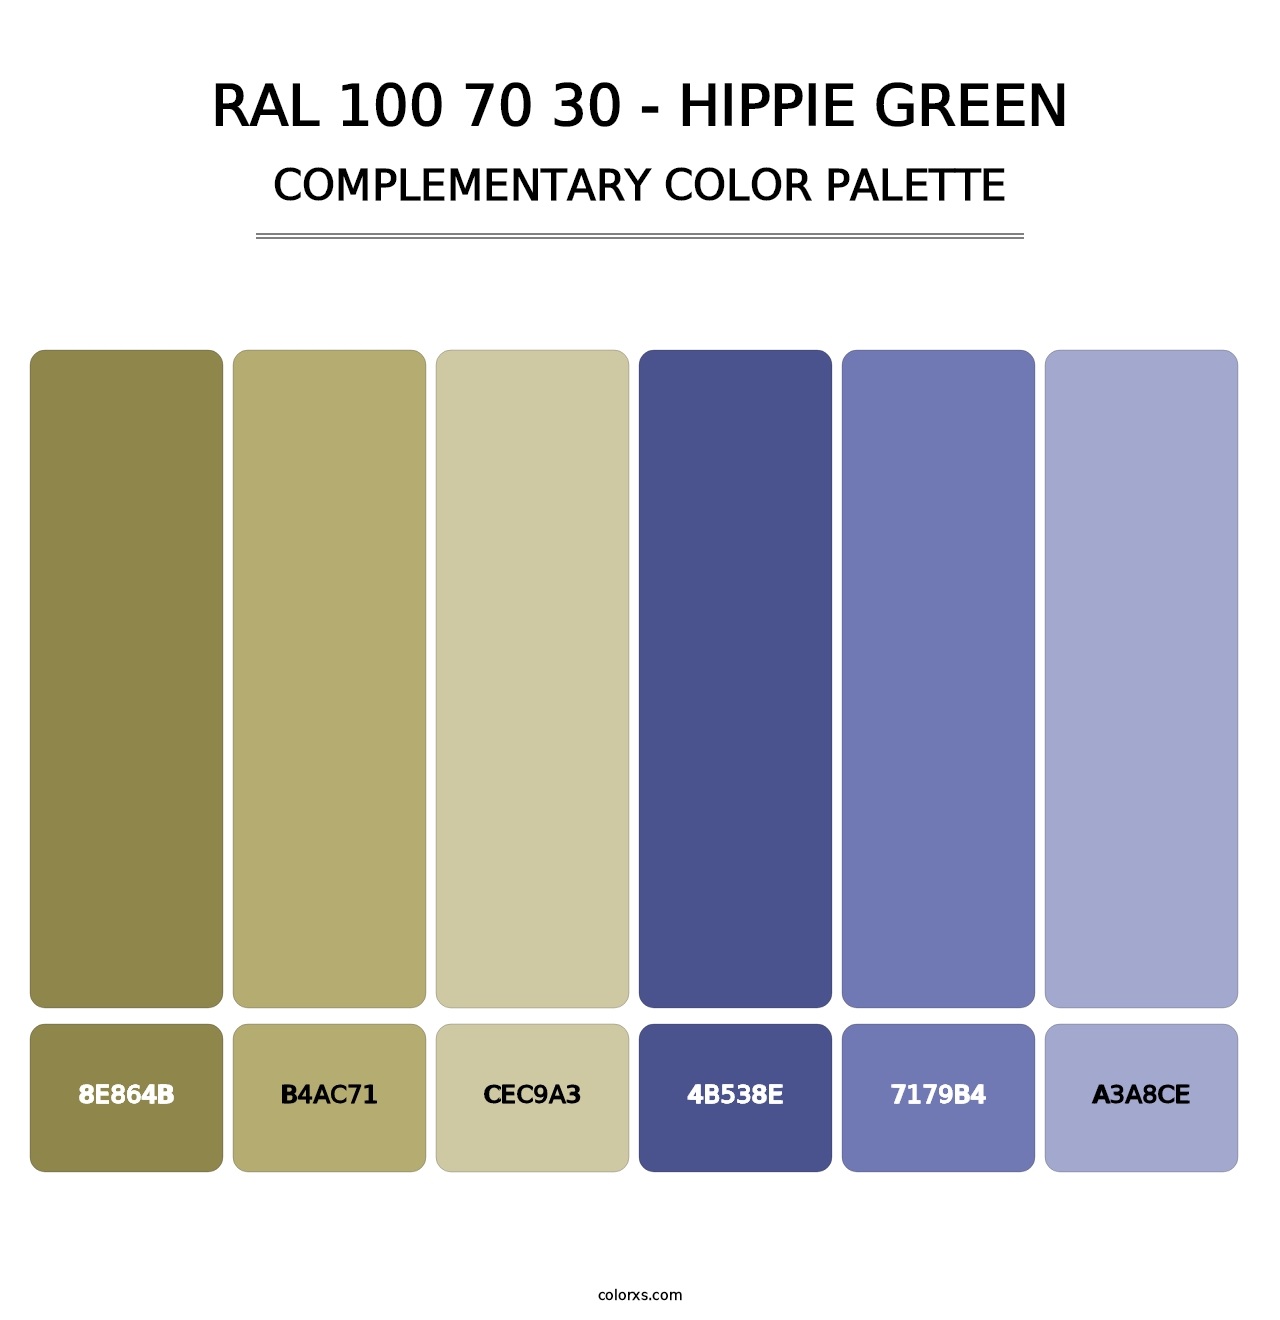 RAL 100 70 30 - Hippie Green - Complementary Color Palette